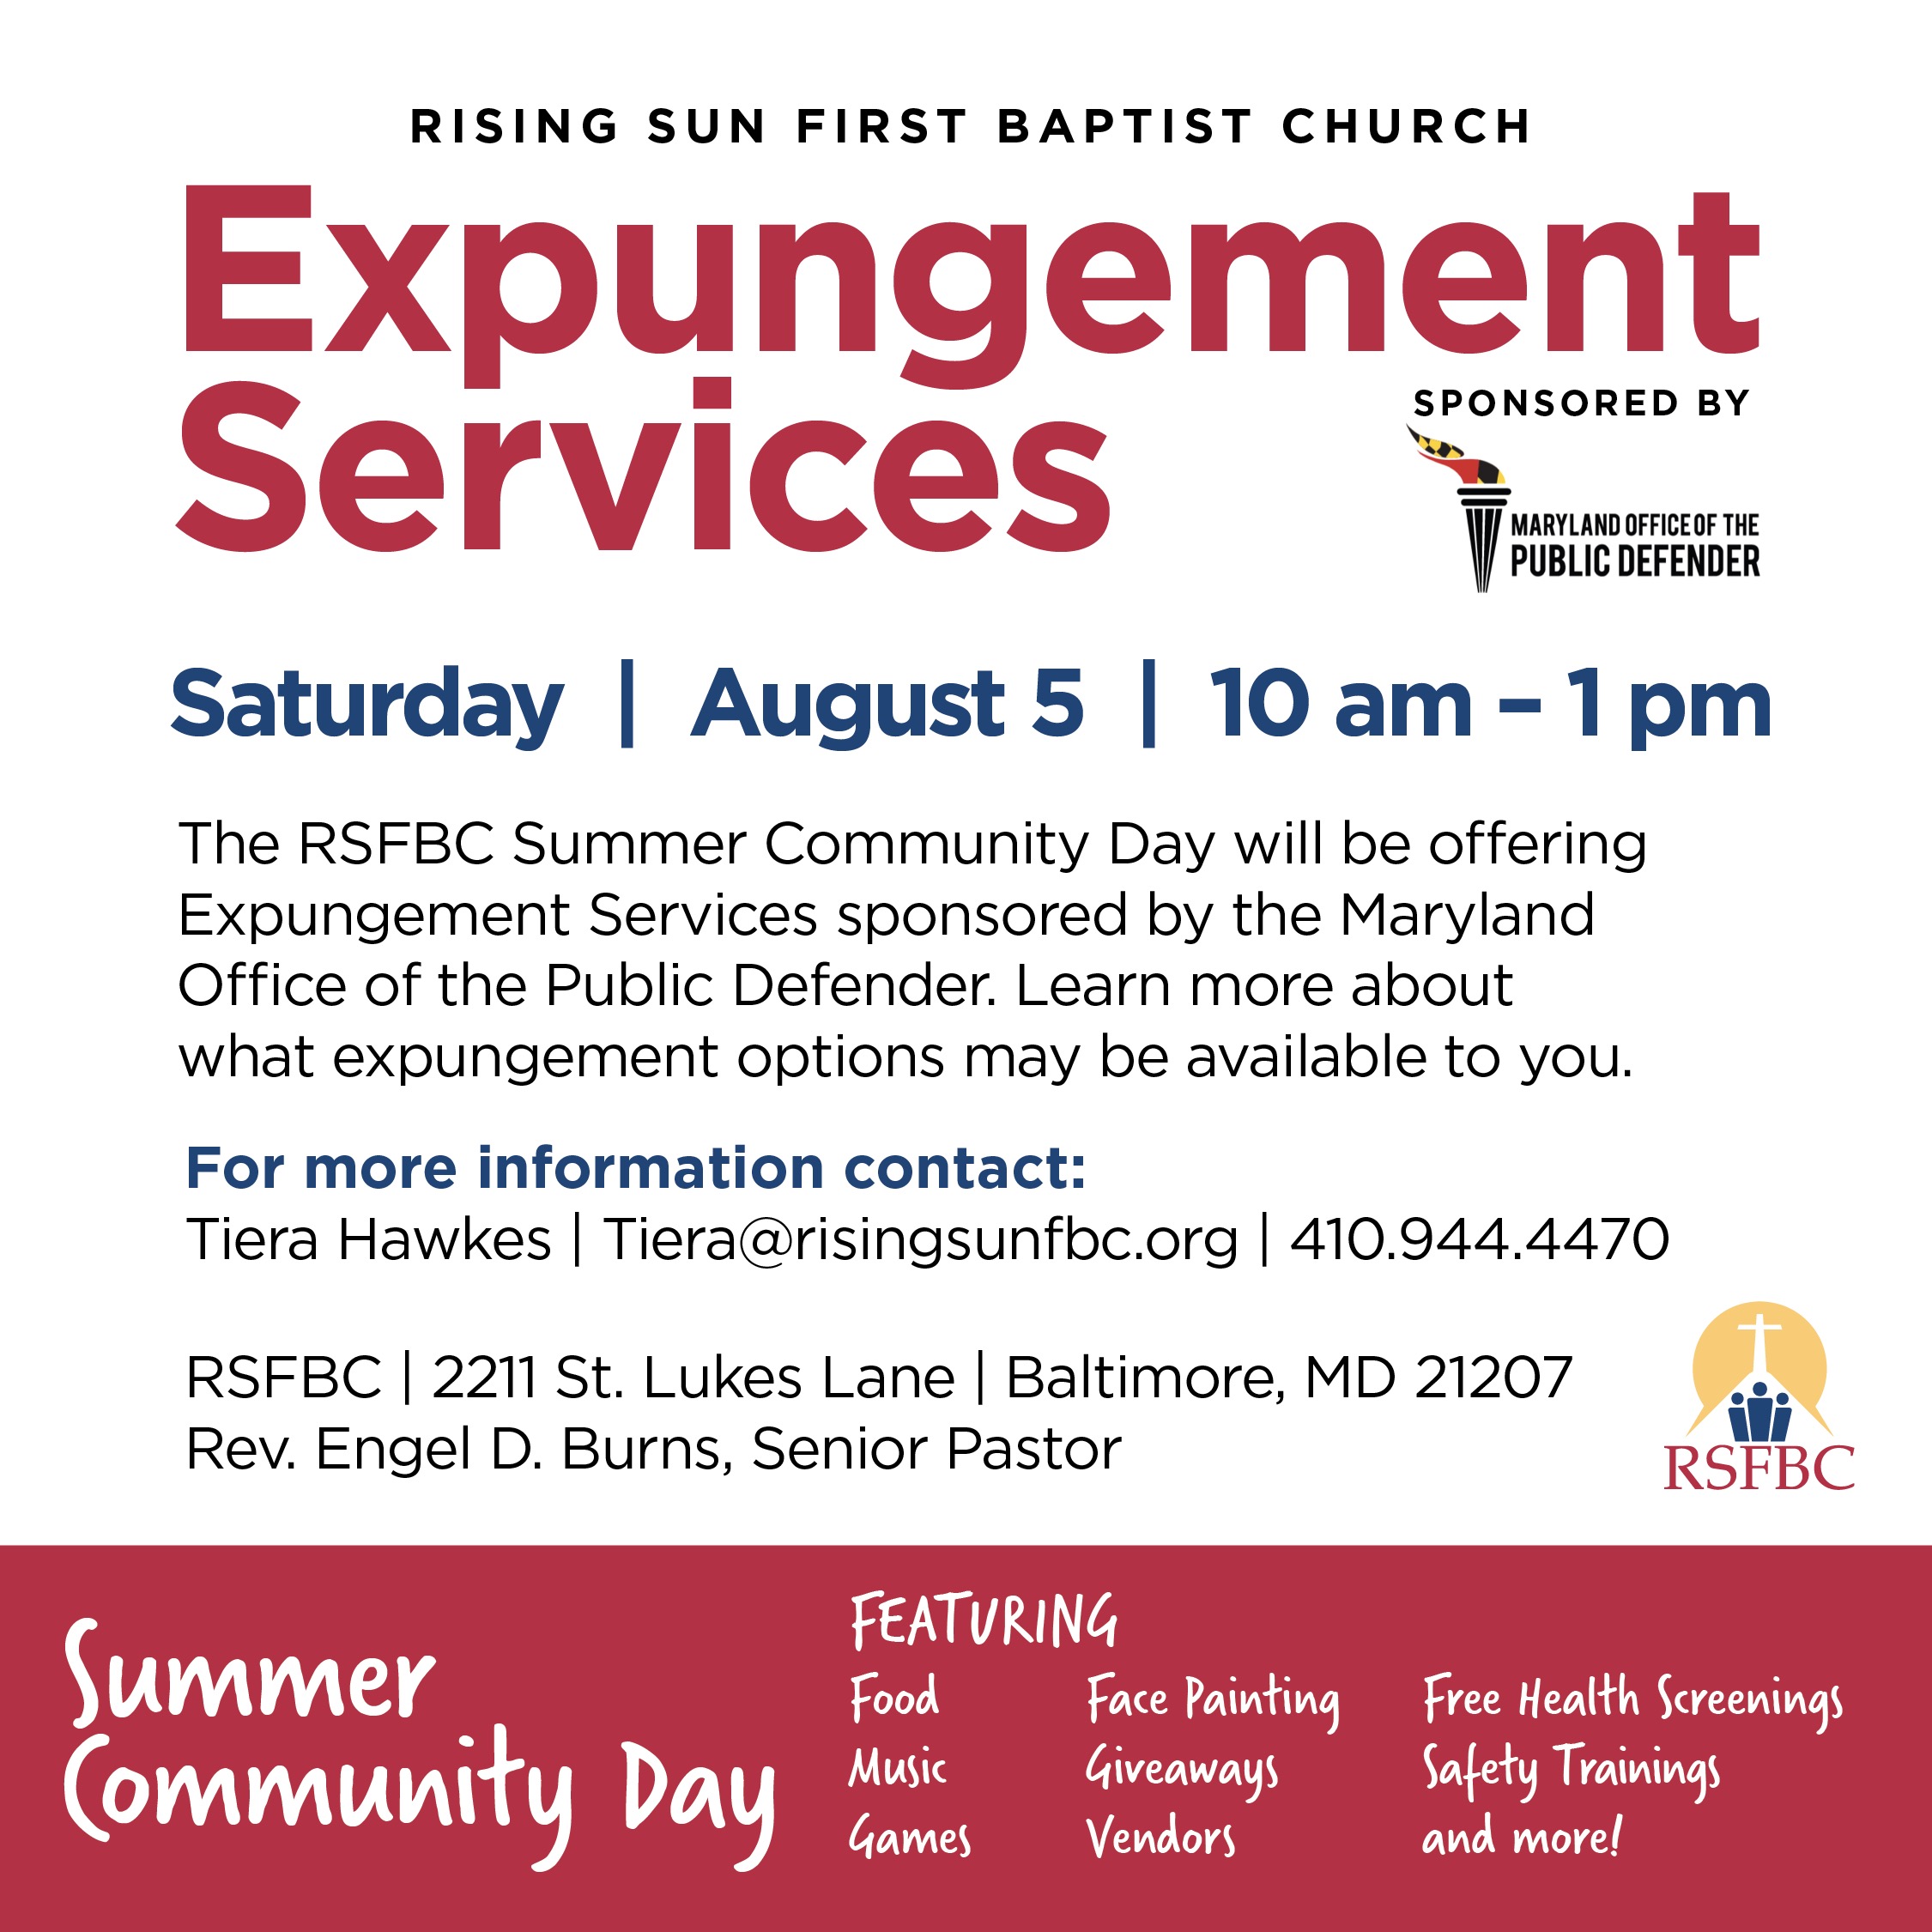 RSFBC Community Day Expungement Services